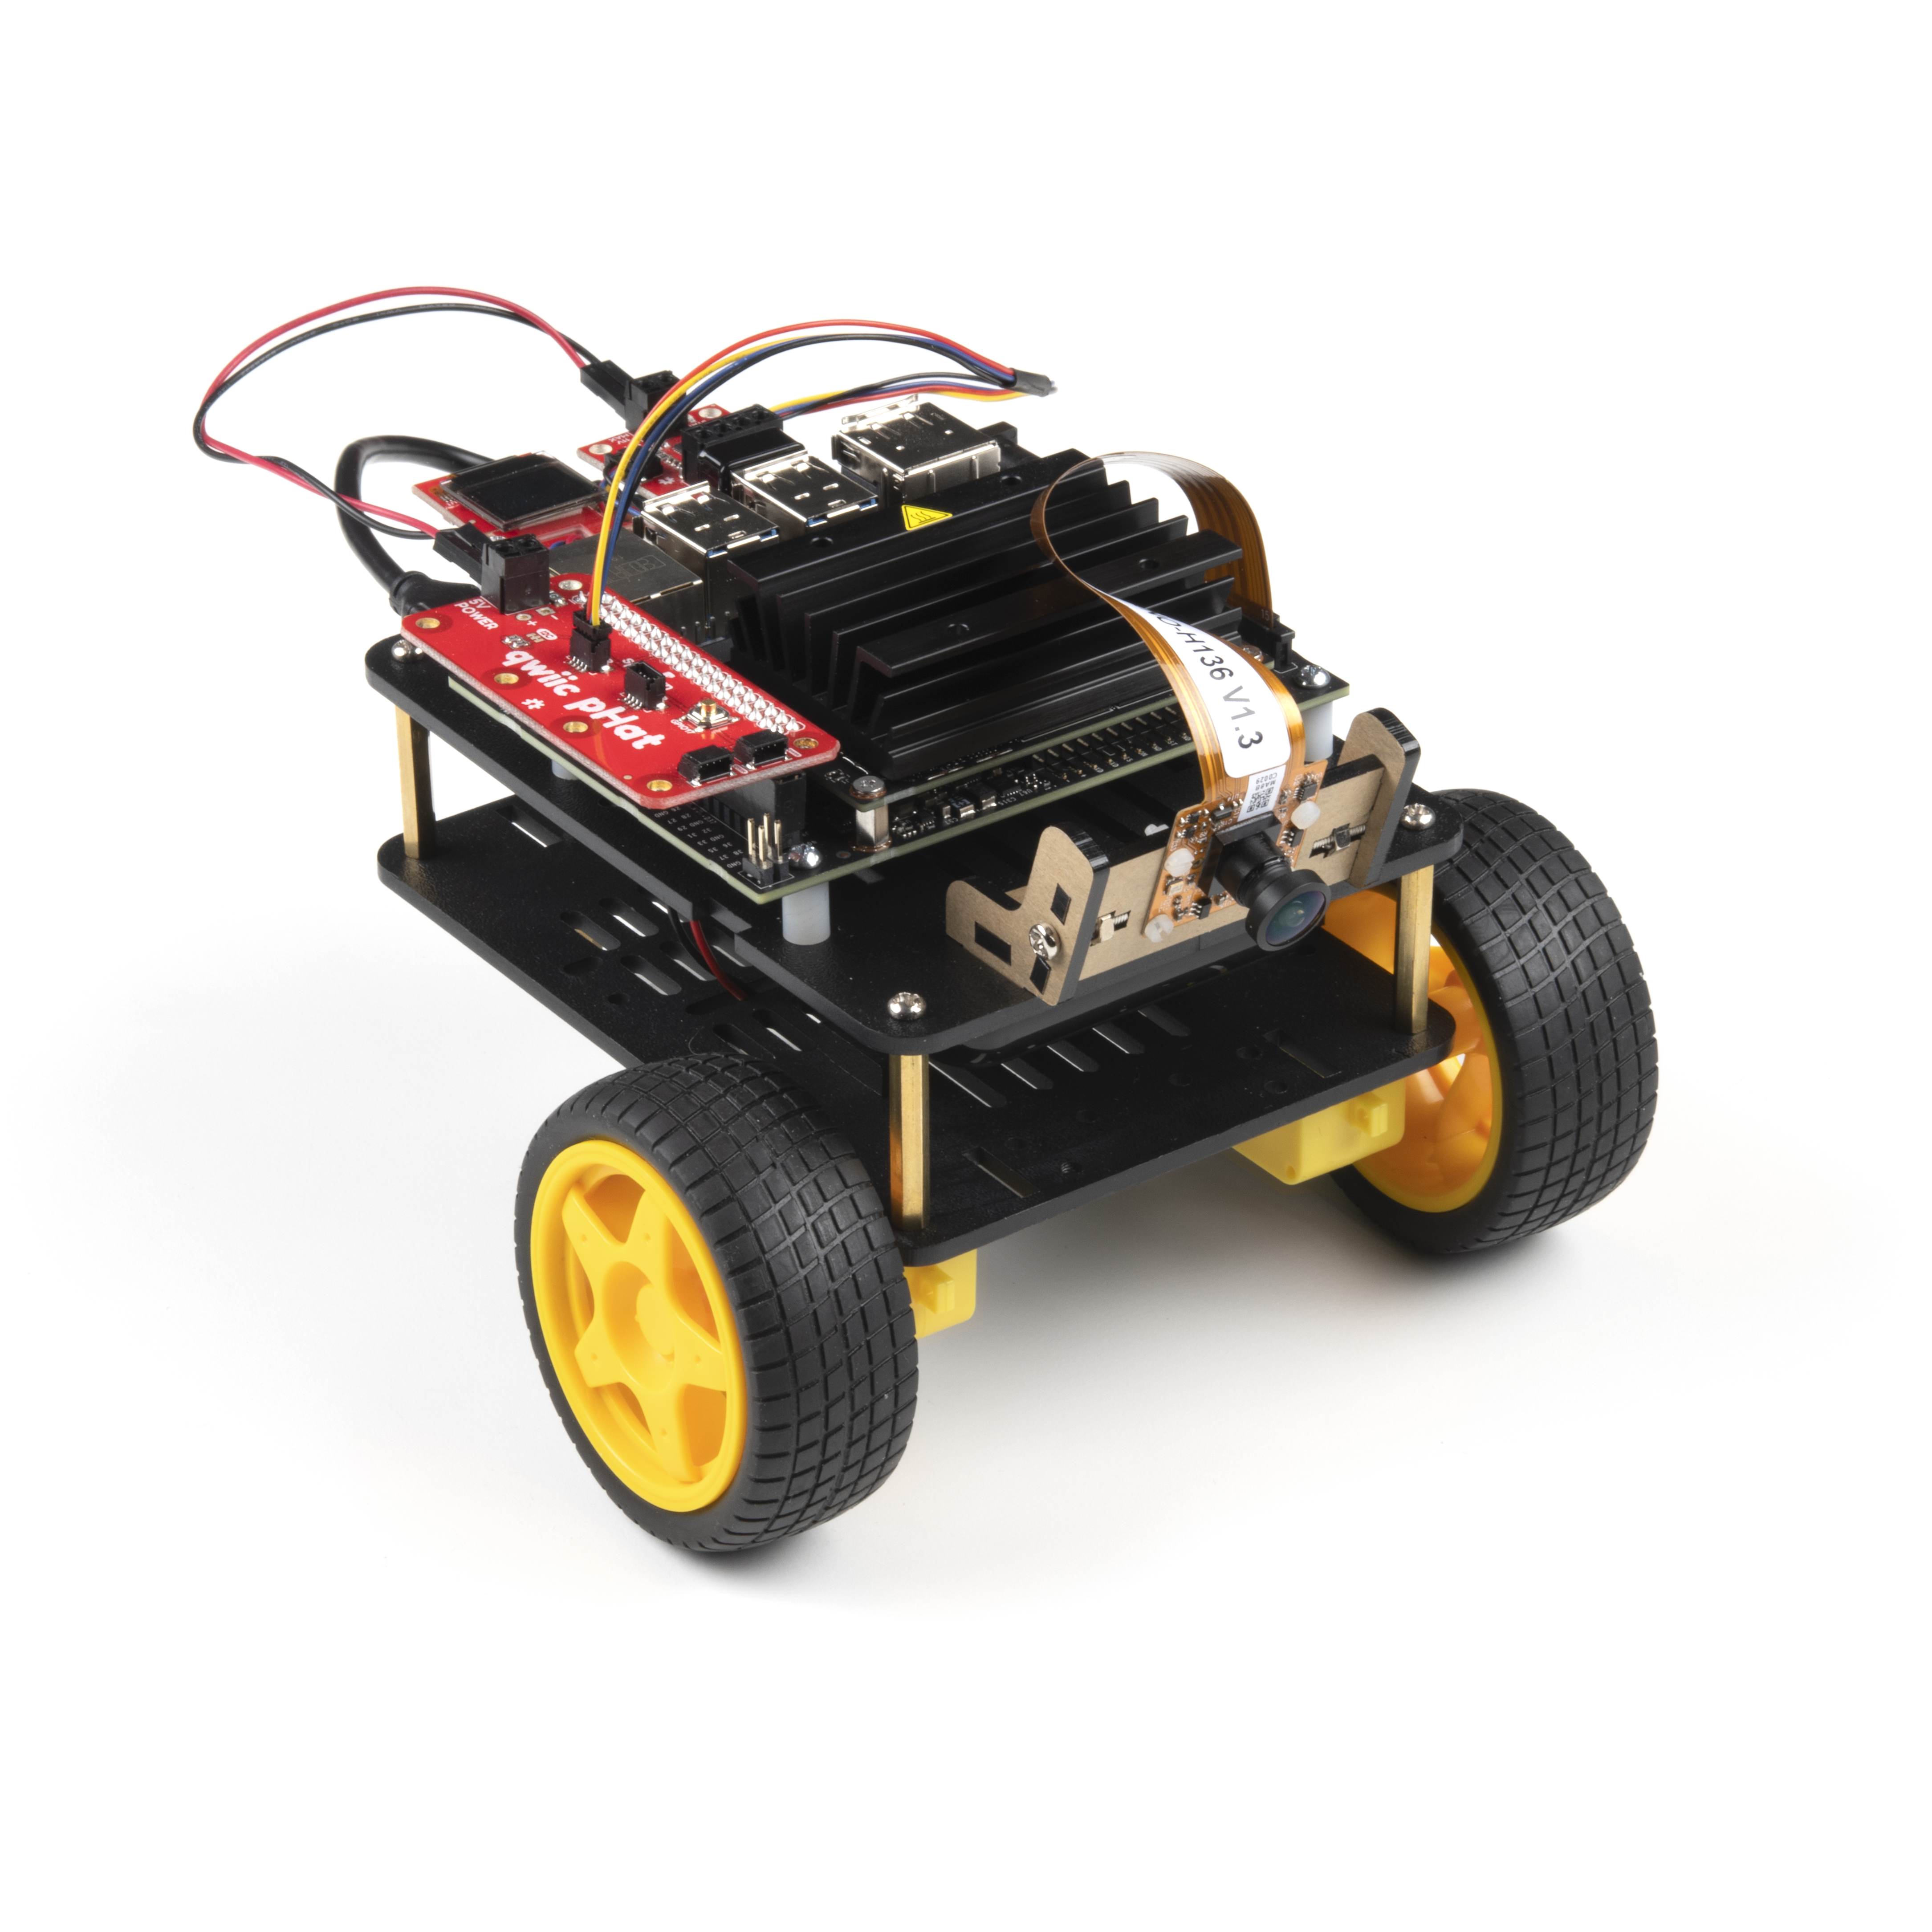 Assembly Guide for SparkFun JetBot AI Kit V2.0 - learn.sparkfun.com